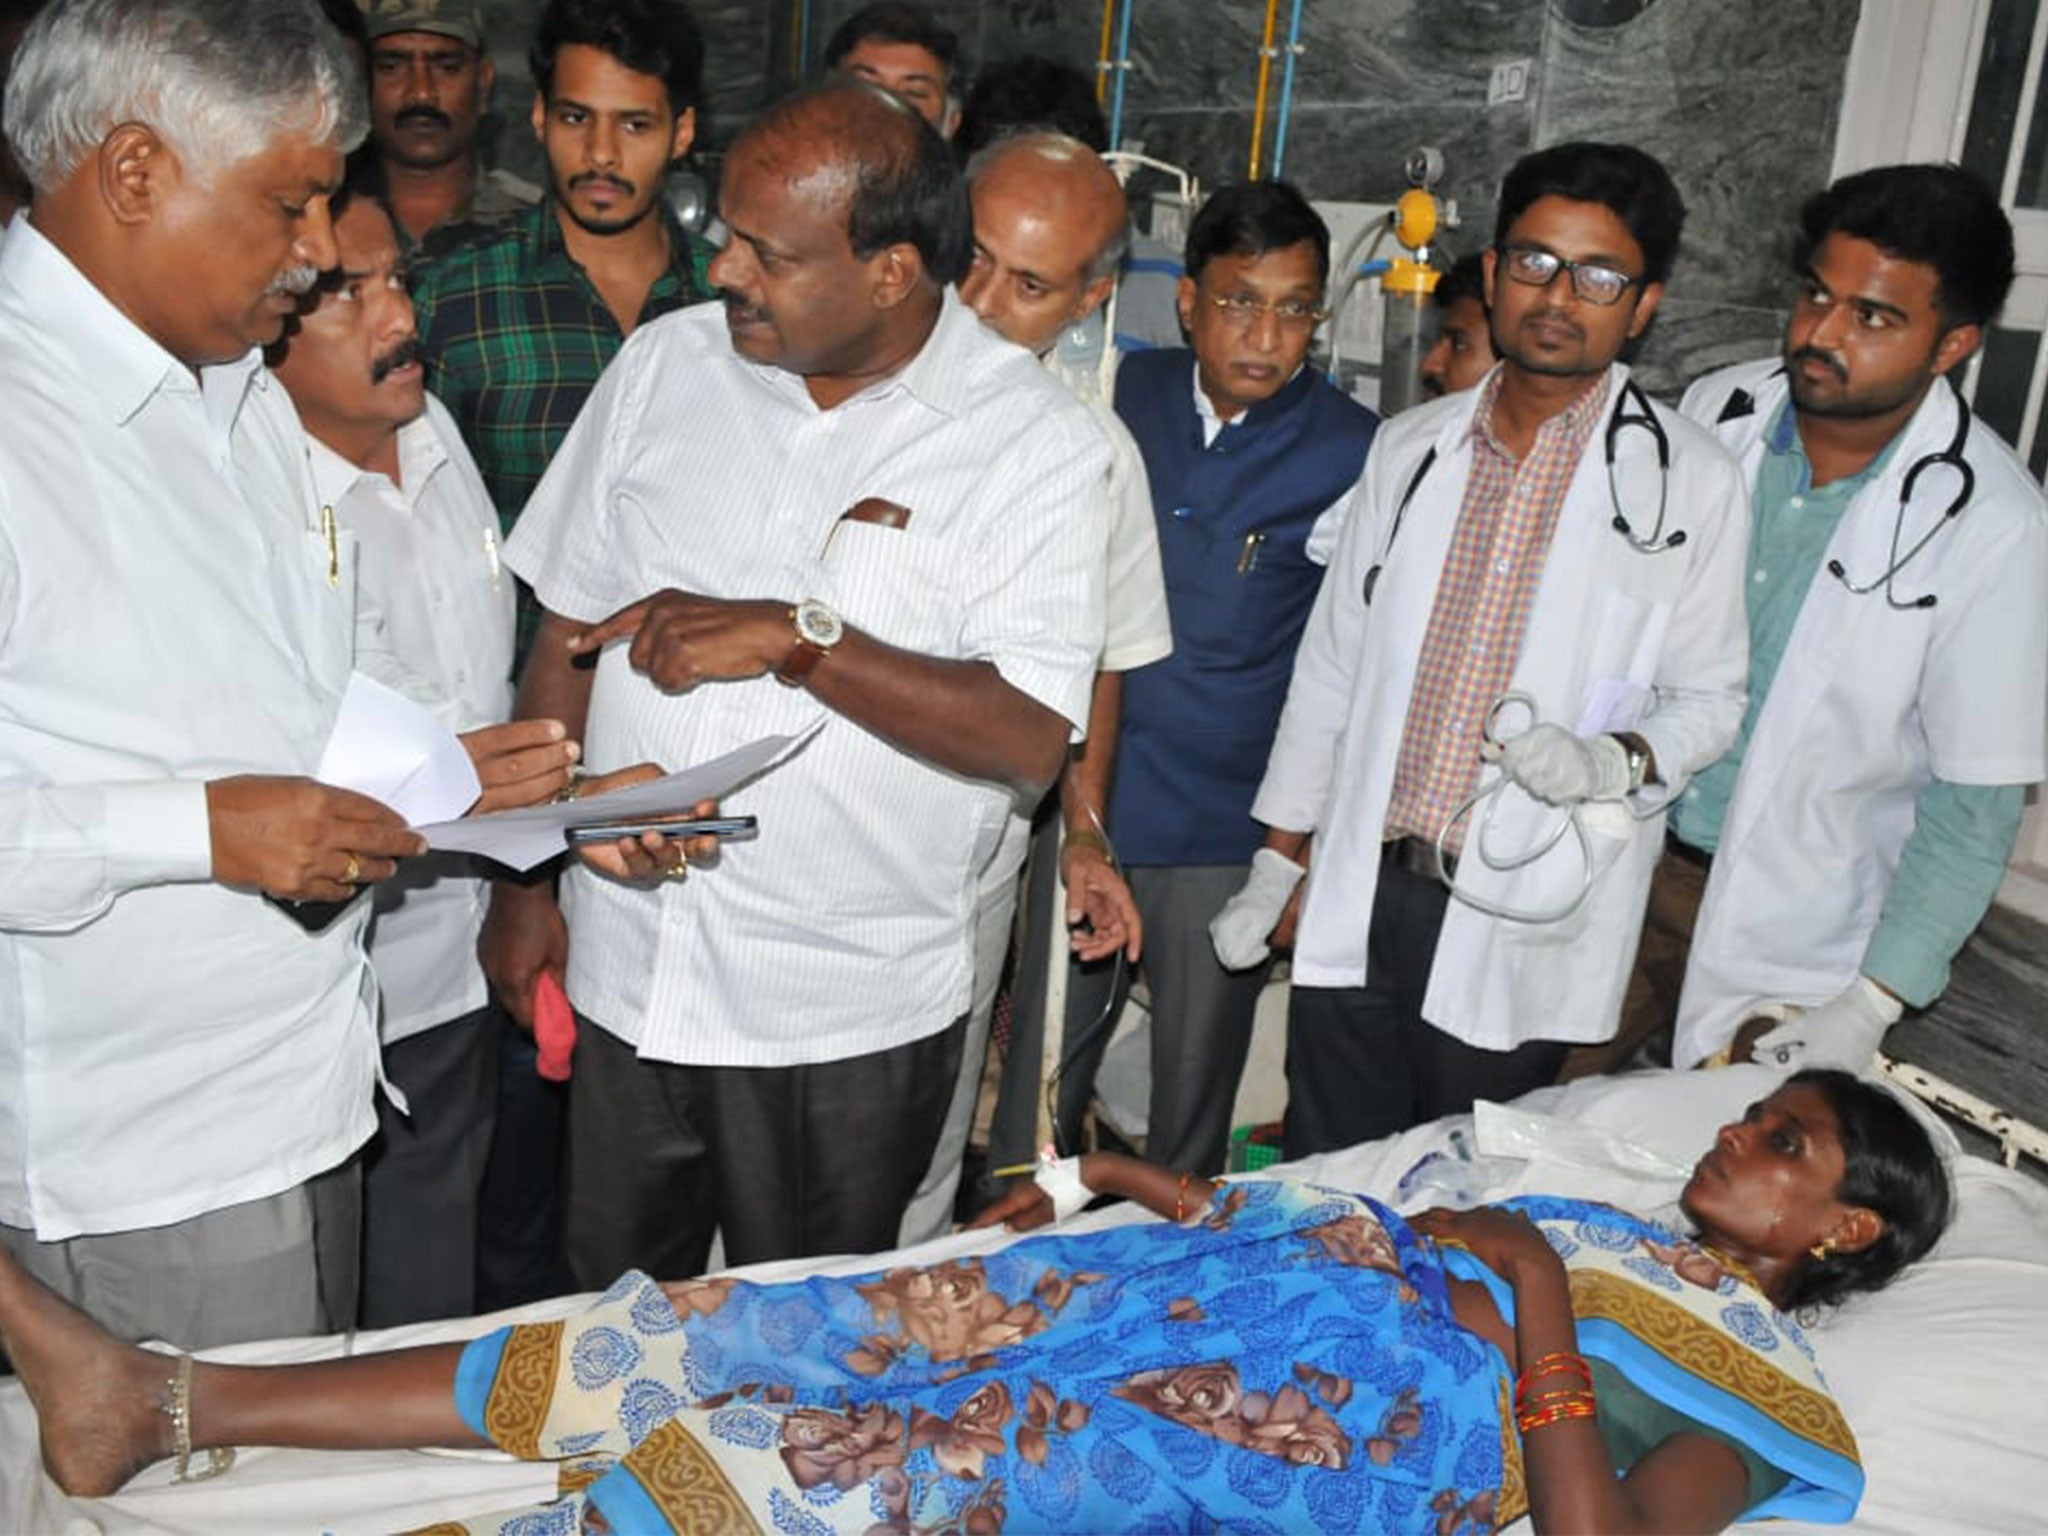 HD Kumaraswamy (centre), chief minister of Karnataka, said the government would pay medical bills of those hospitalised